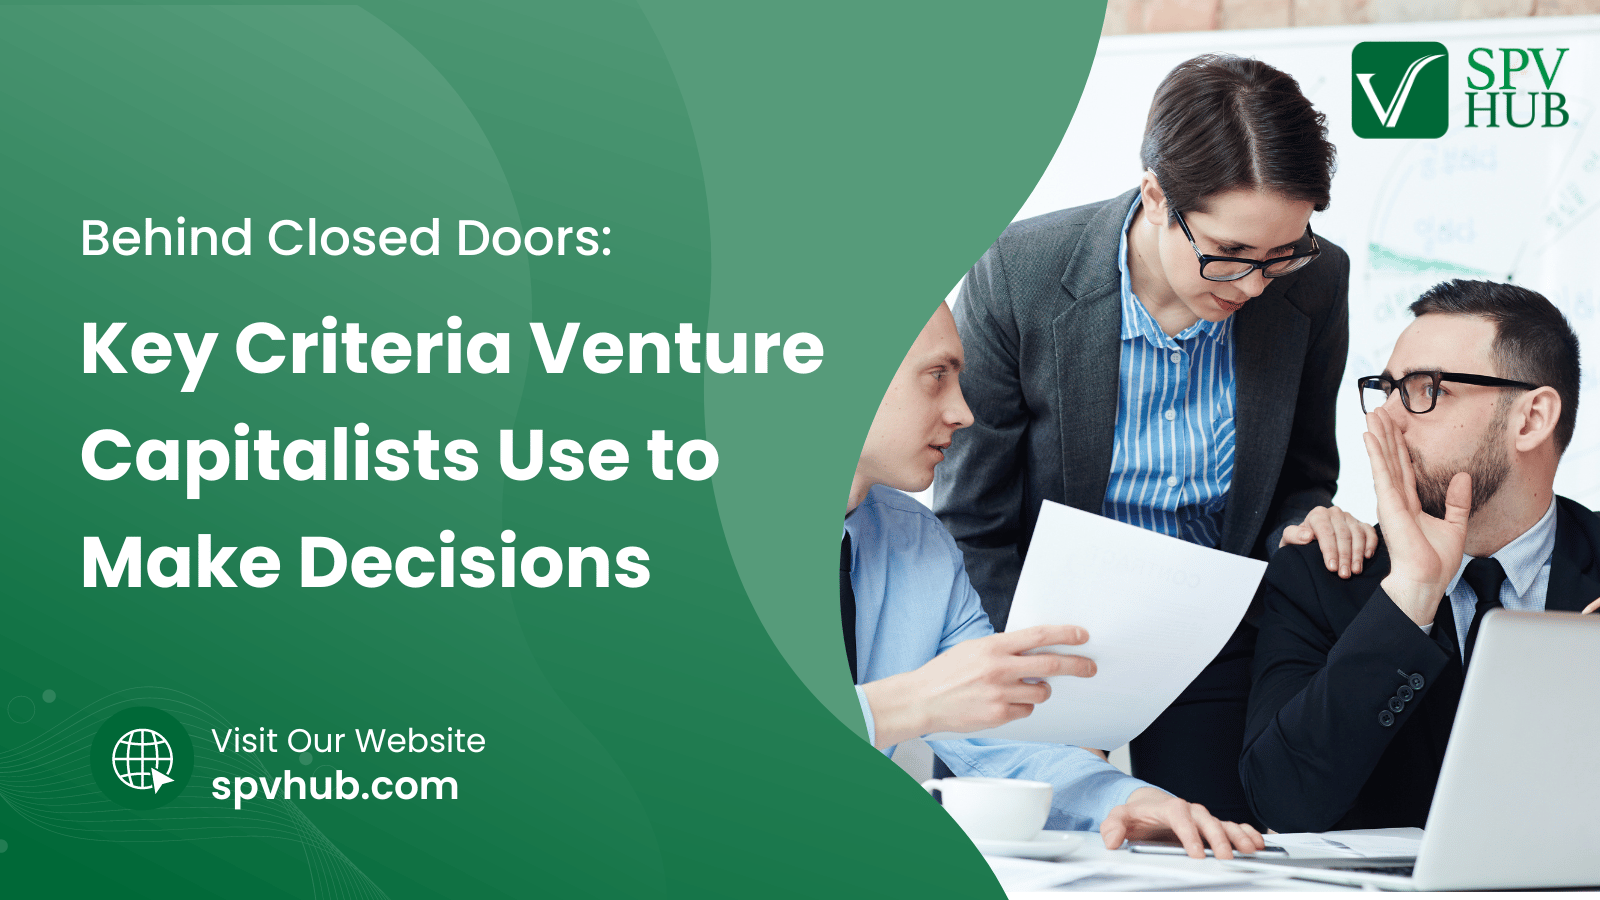 Behind Closed Doors: Key Criteria Venture Capitalists Use to Make Decisions